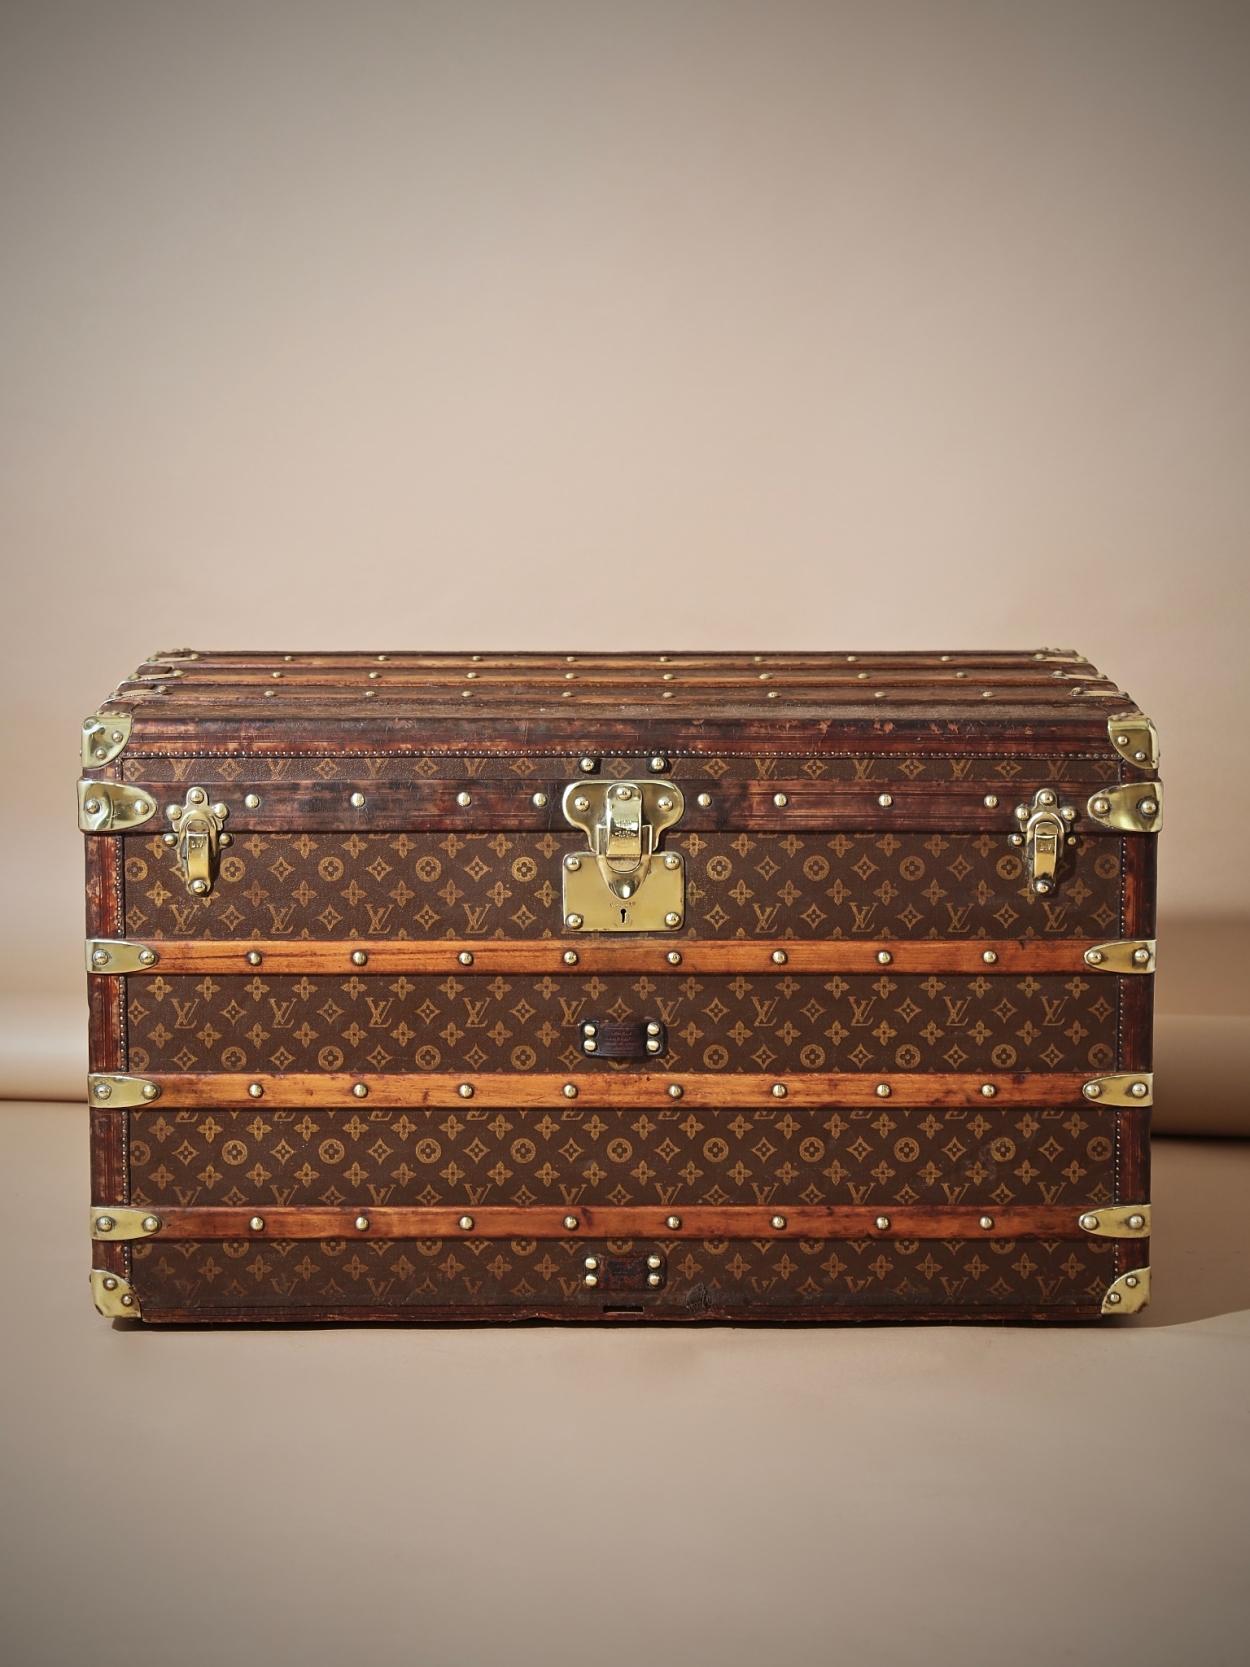 the-well-traveled-trunk-louis-vuitton-thumbnail-product-5725-1